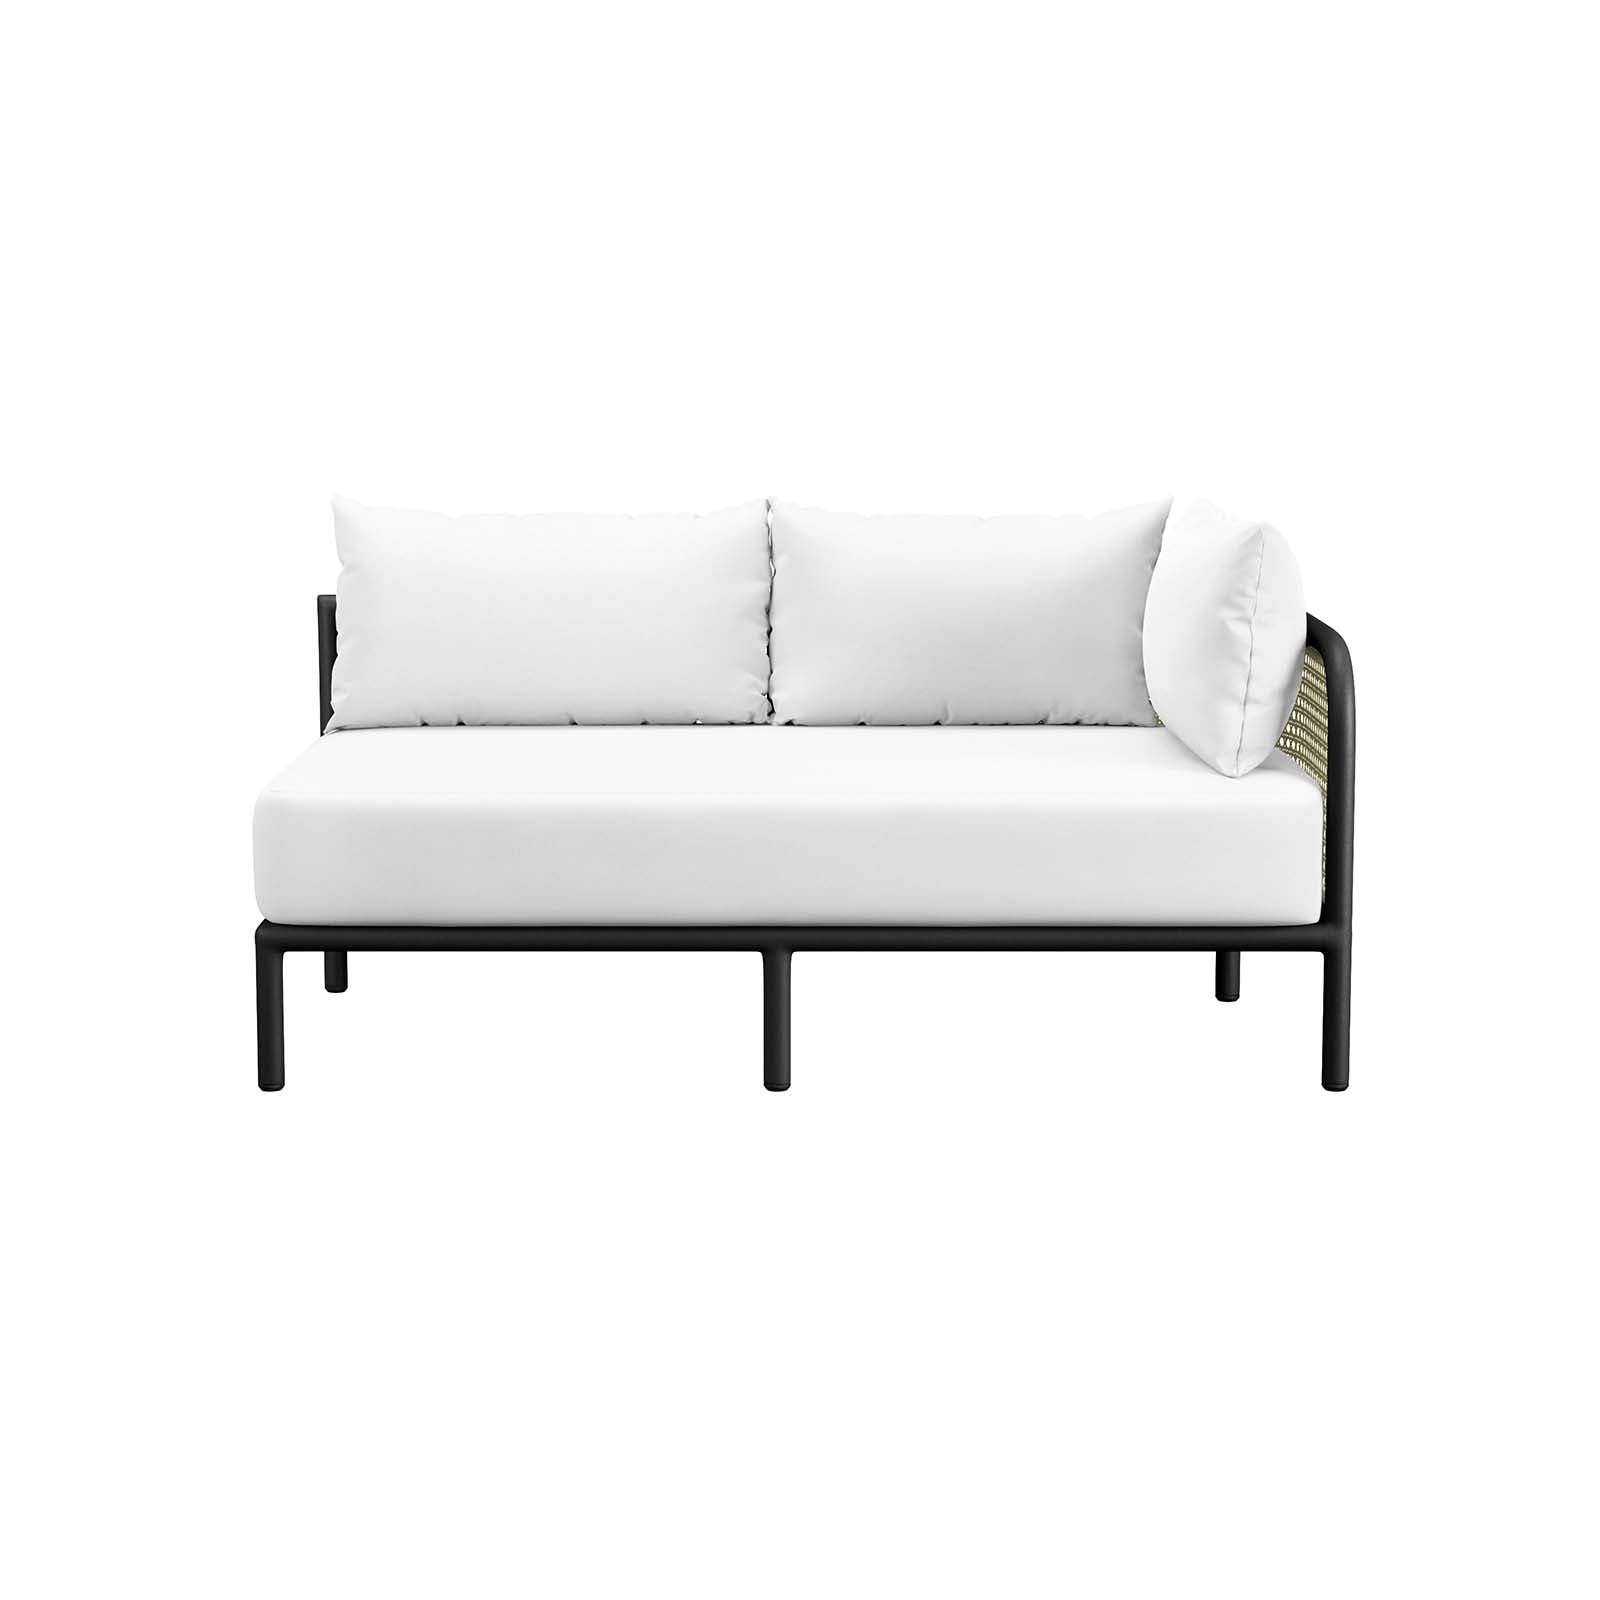 Hanalei Outdoor Patio Right-Arm Loveseat - East Shore Modern Home Furnishings